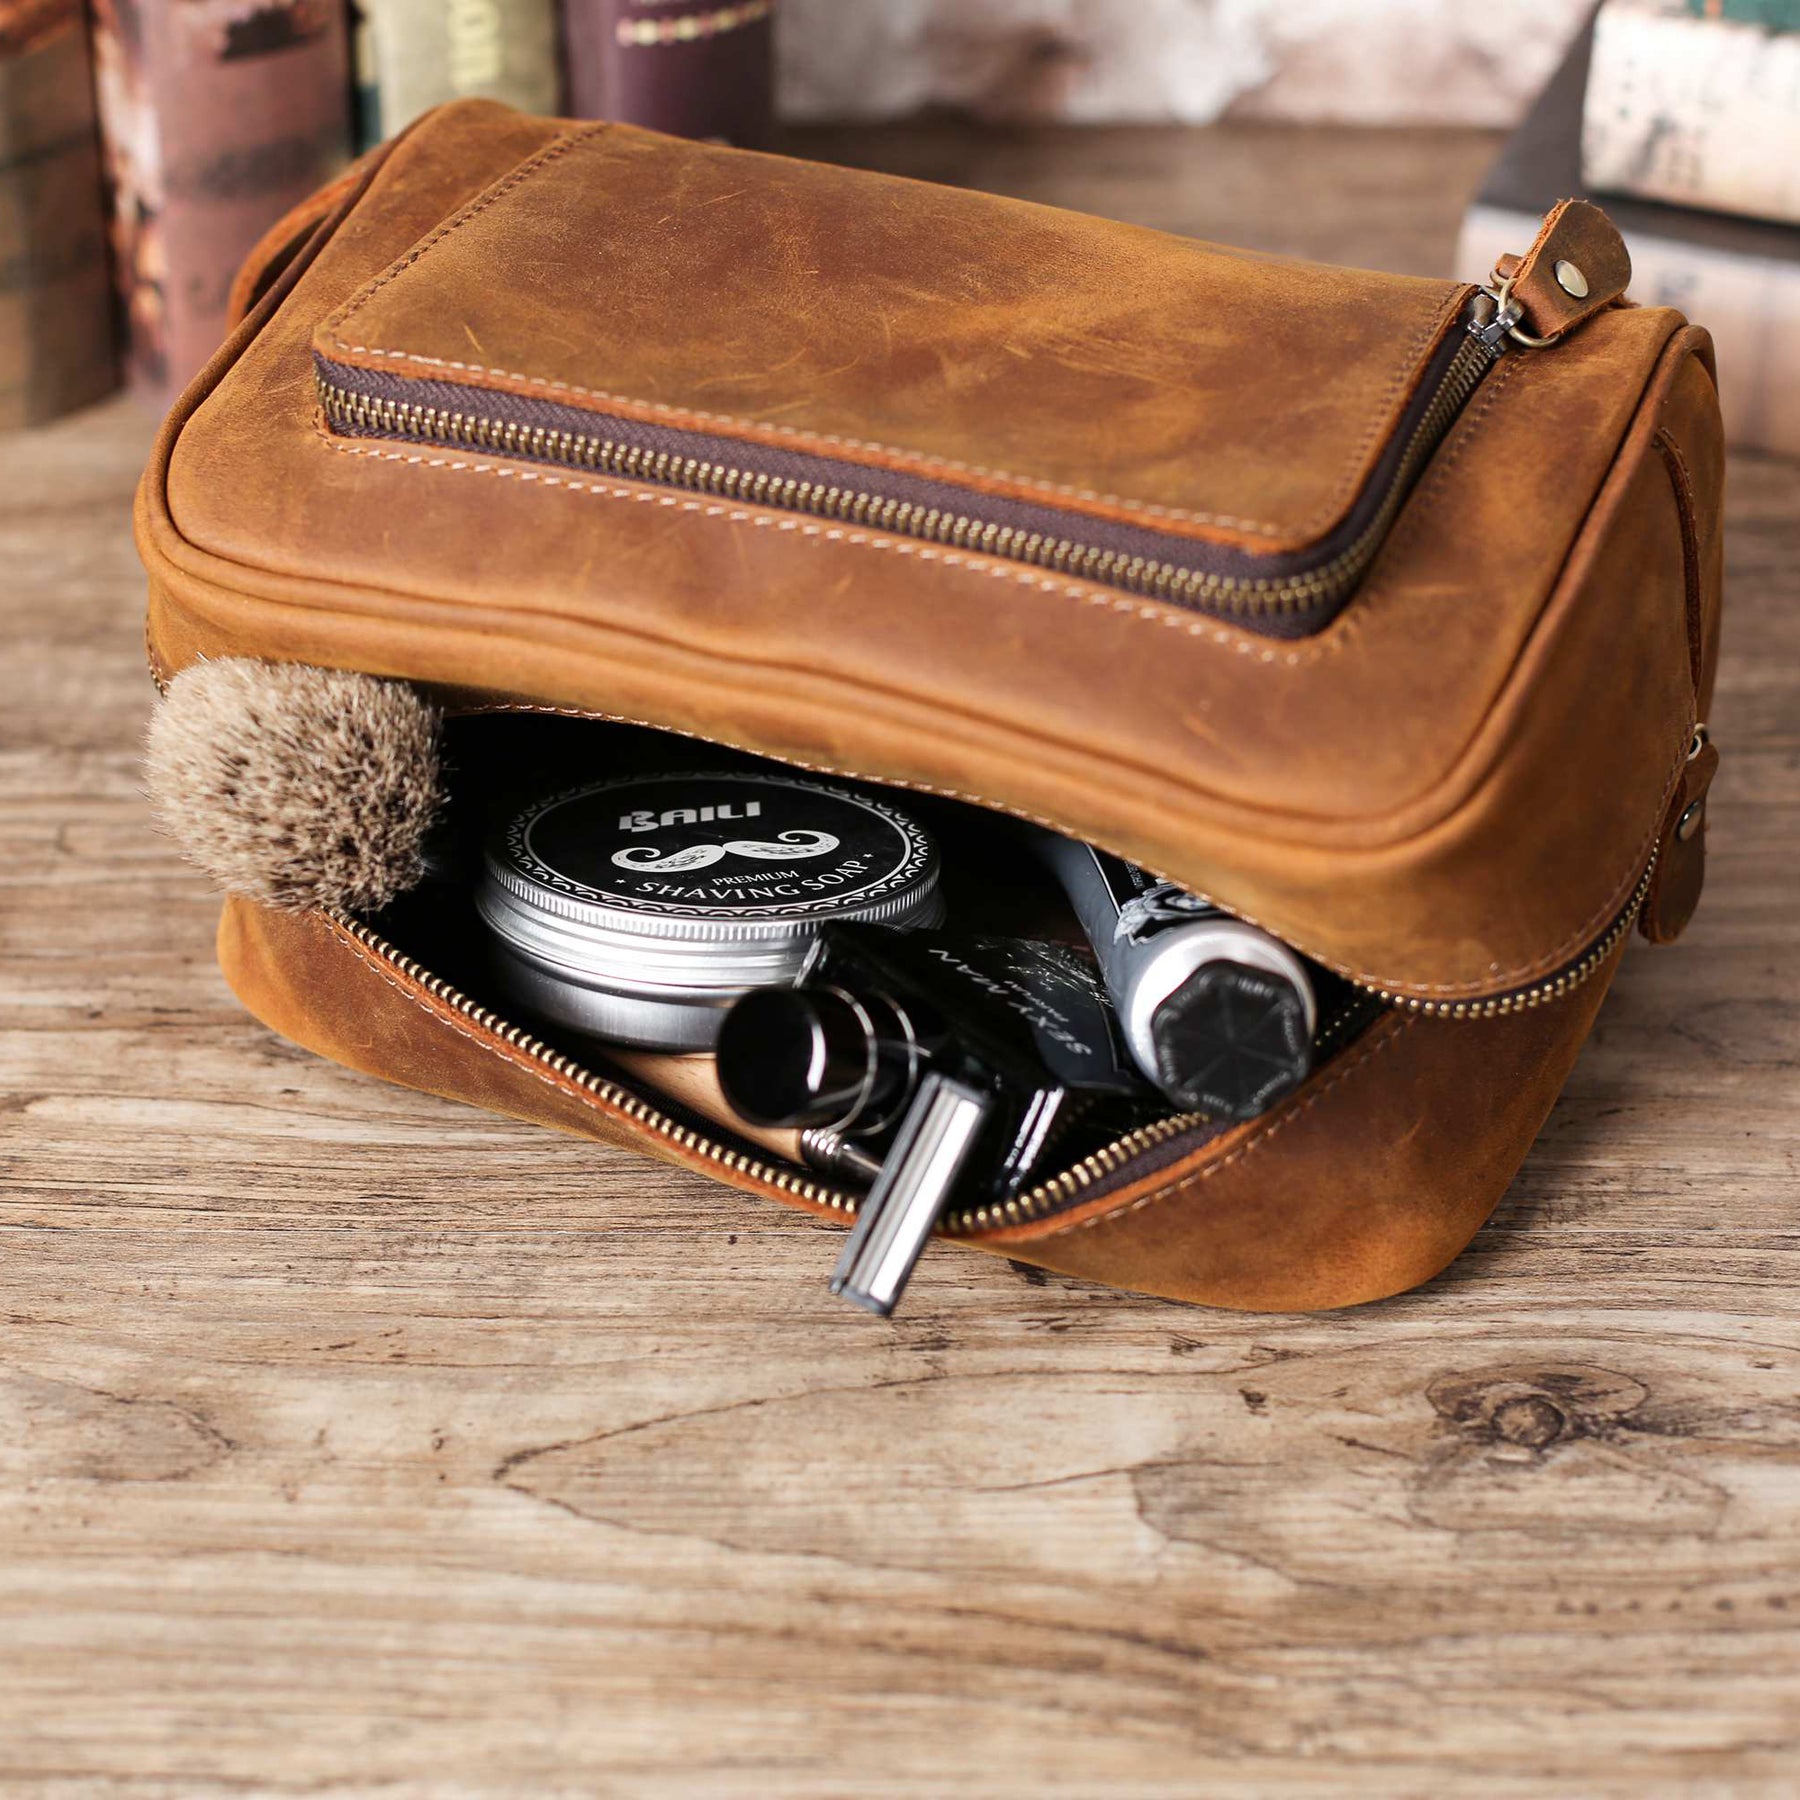 Personalized Leather Toiletry Bag – NaturalLeatherShop